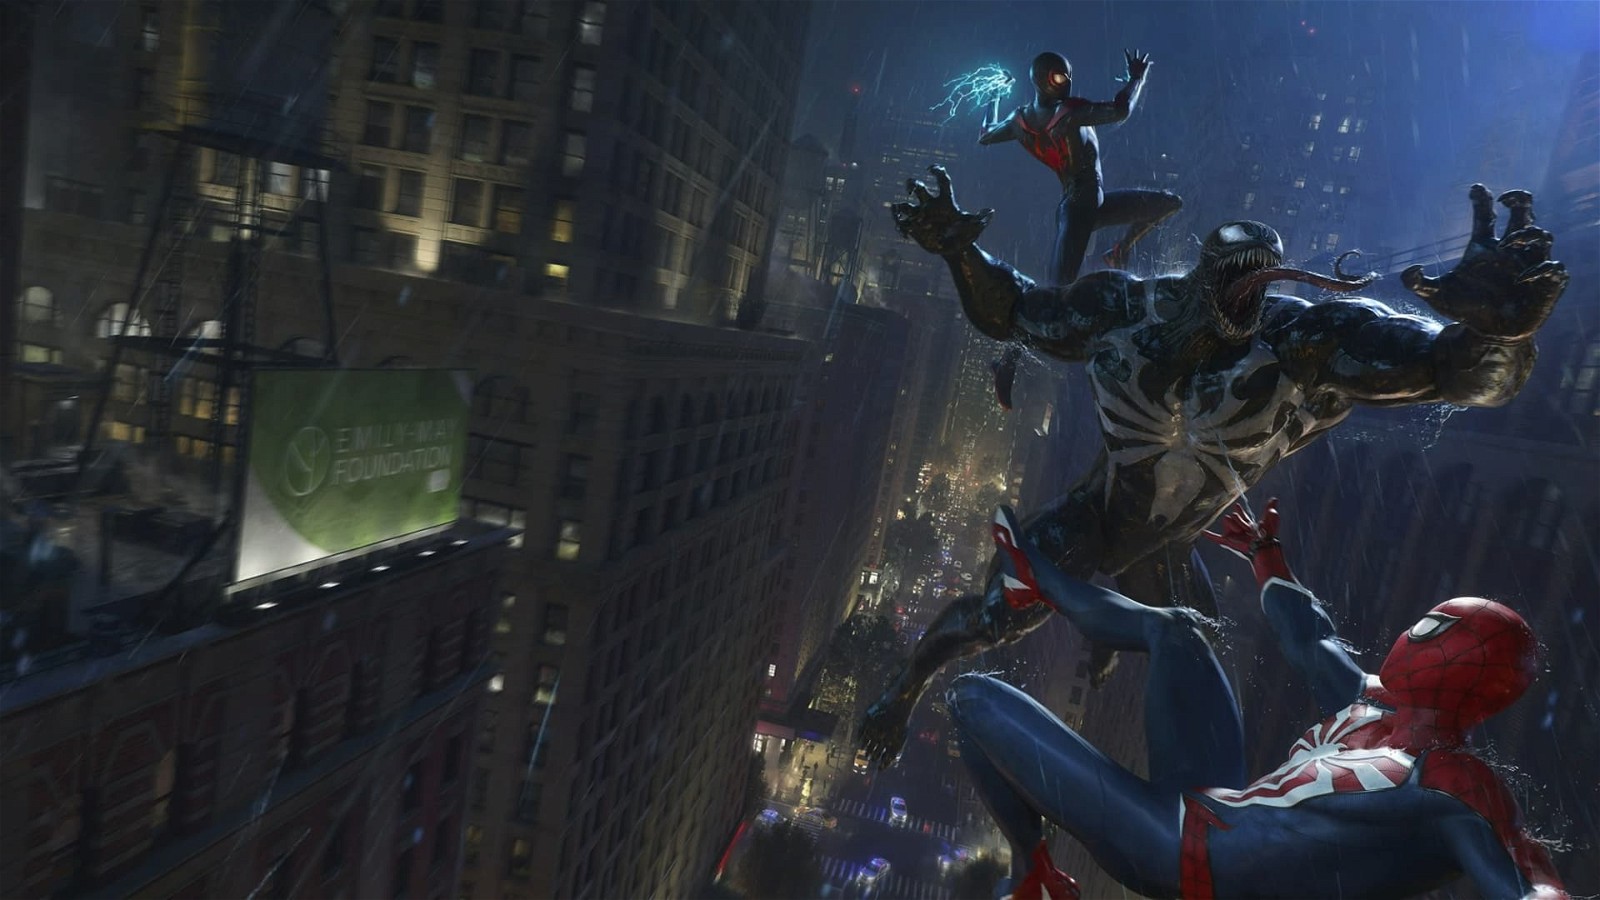 Marvel's Spider-Man 2 is only 30 hours long, according to leaks.